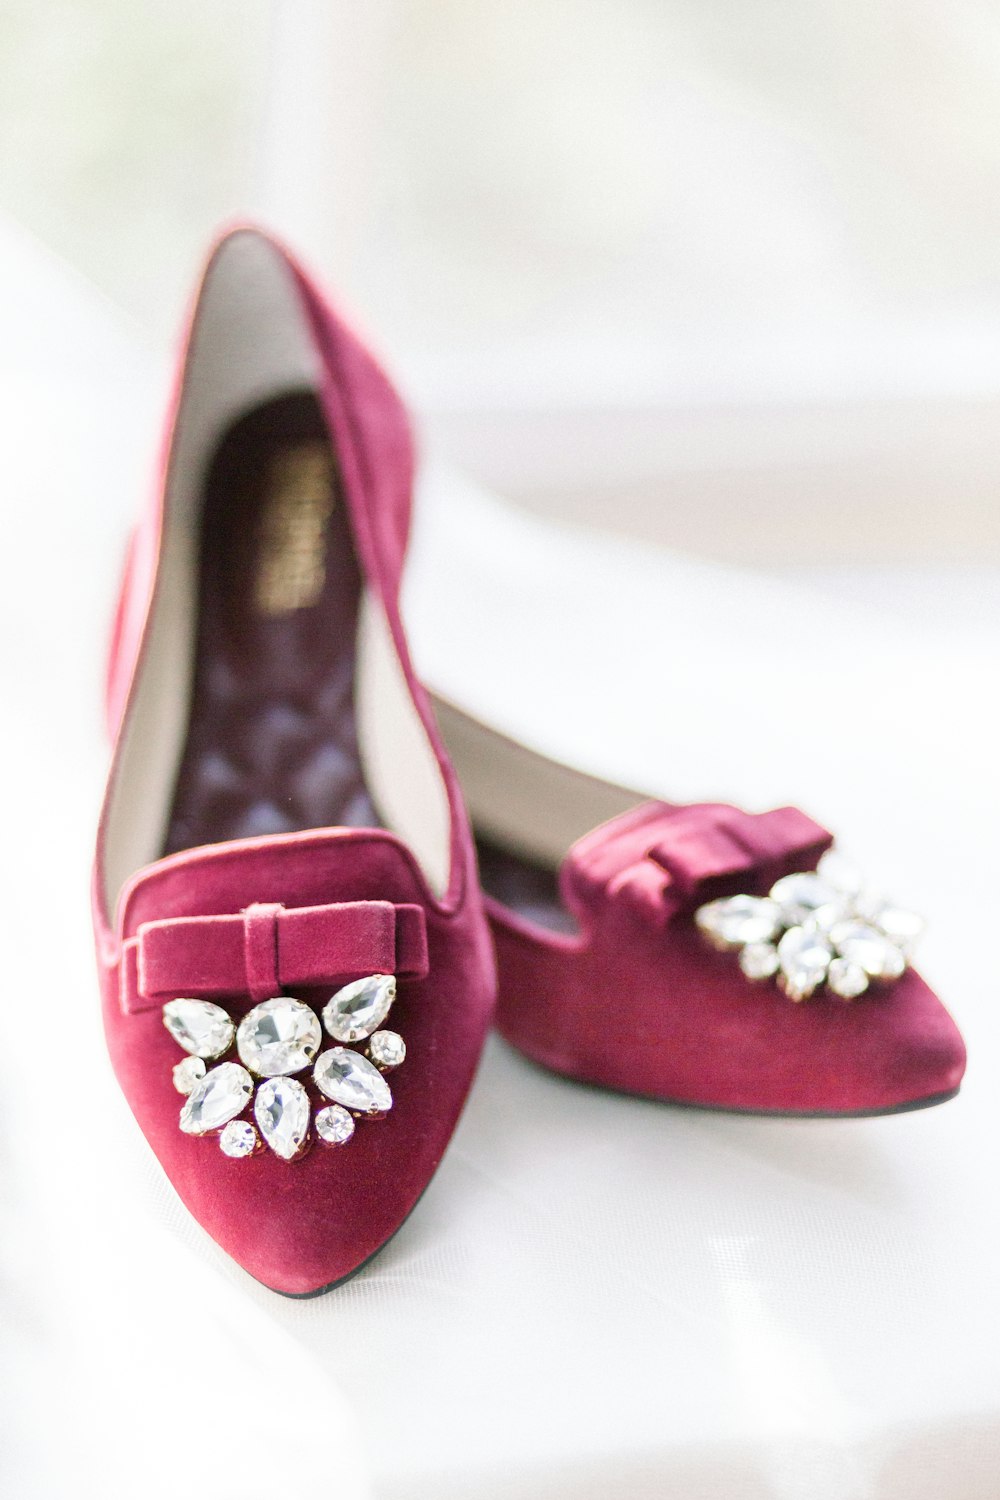 red and silver floral flats